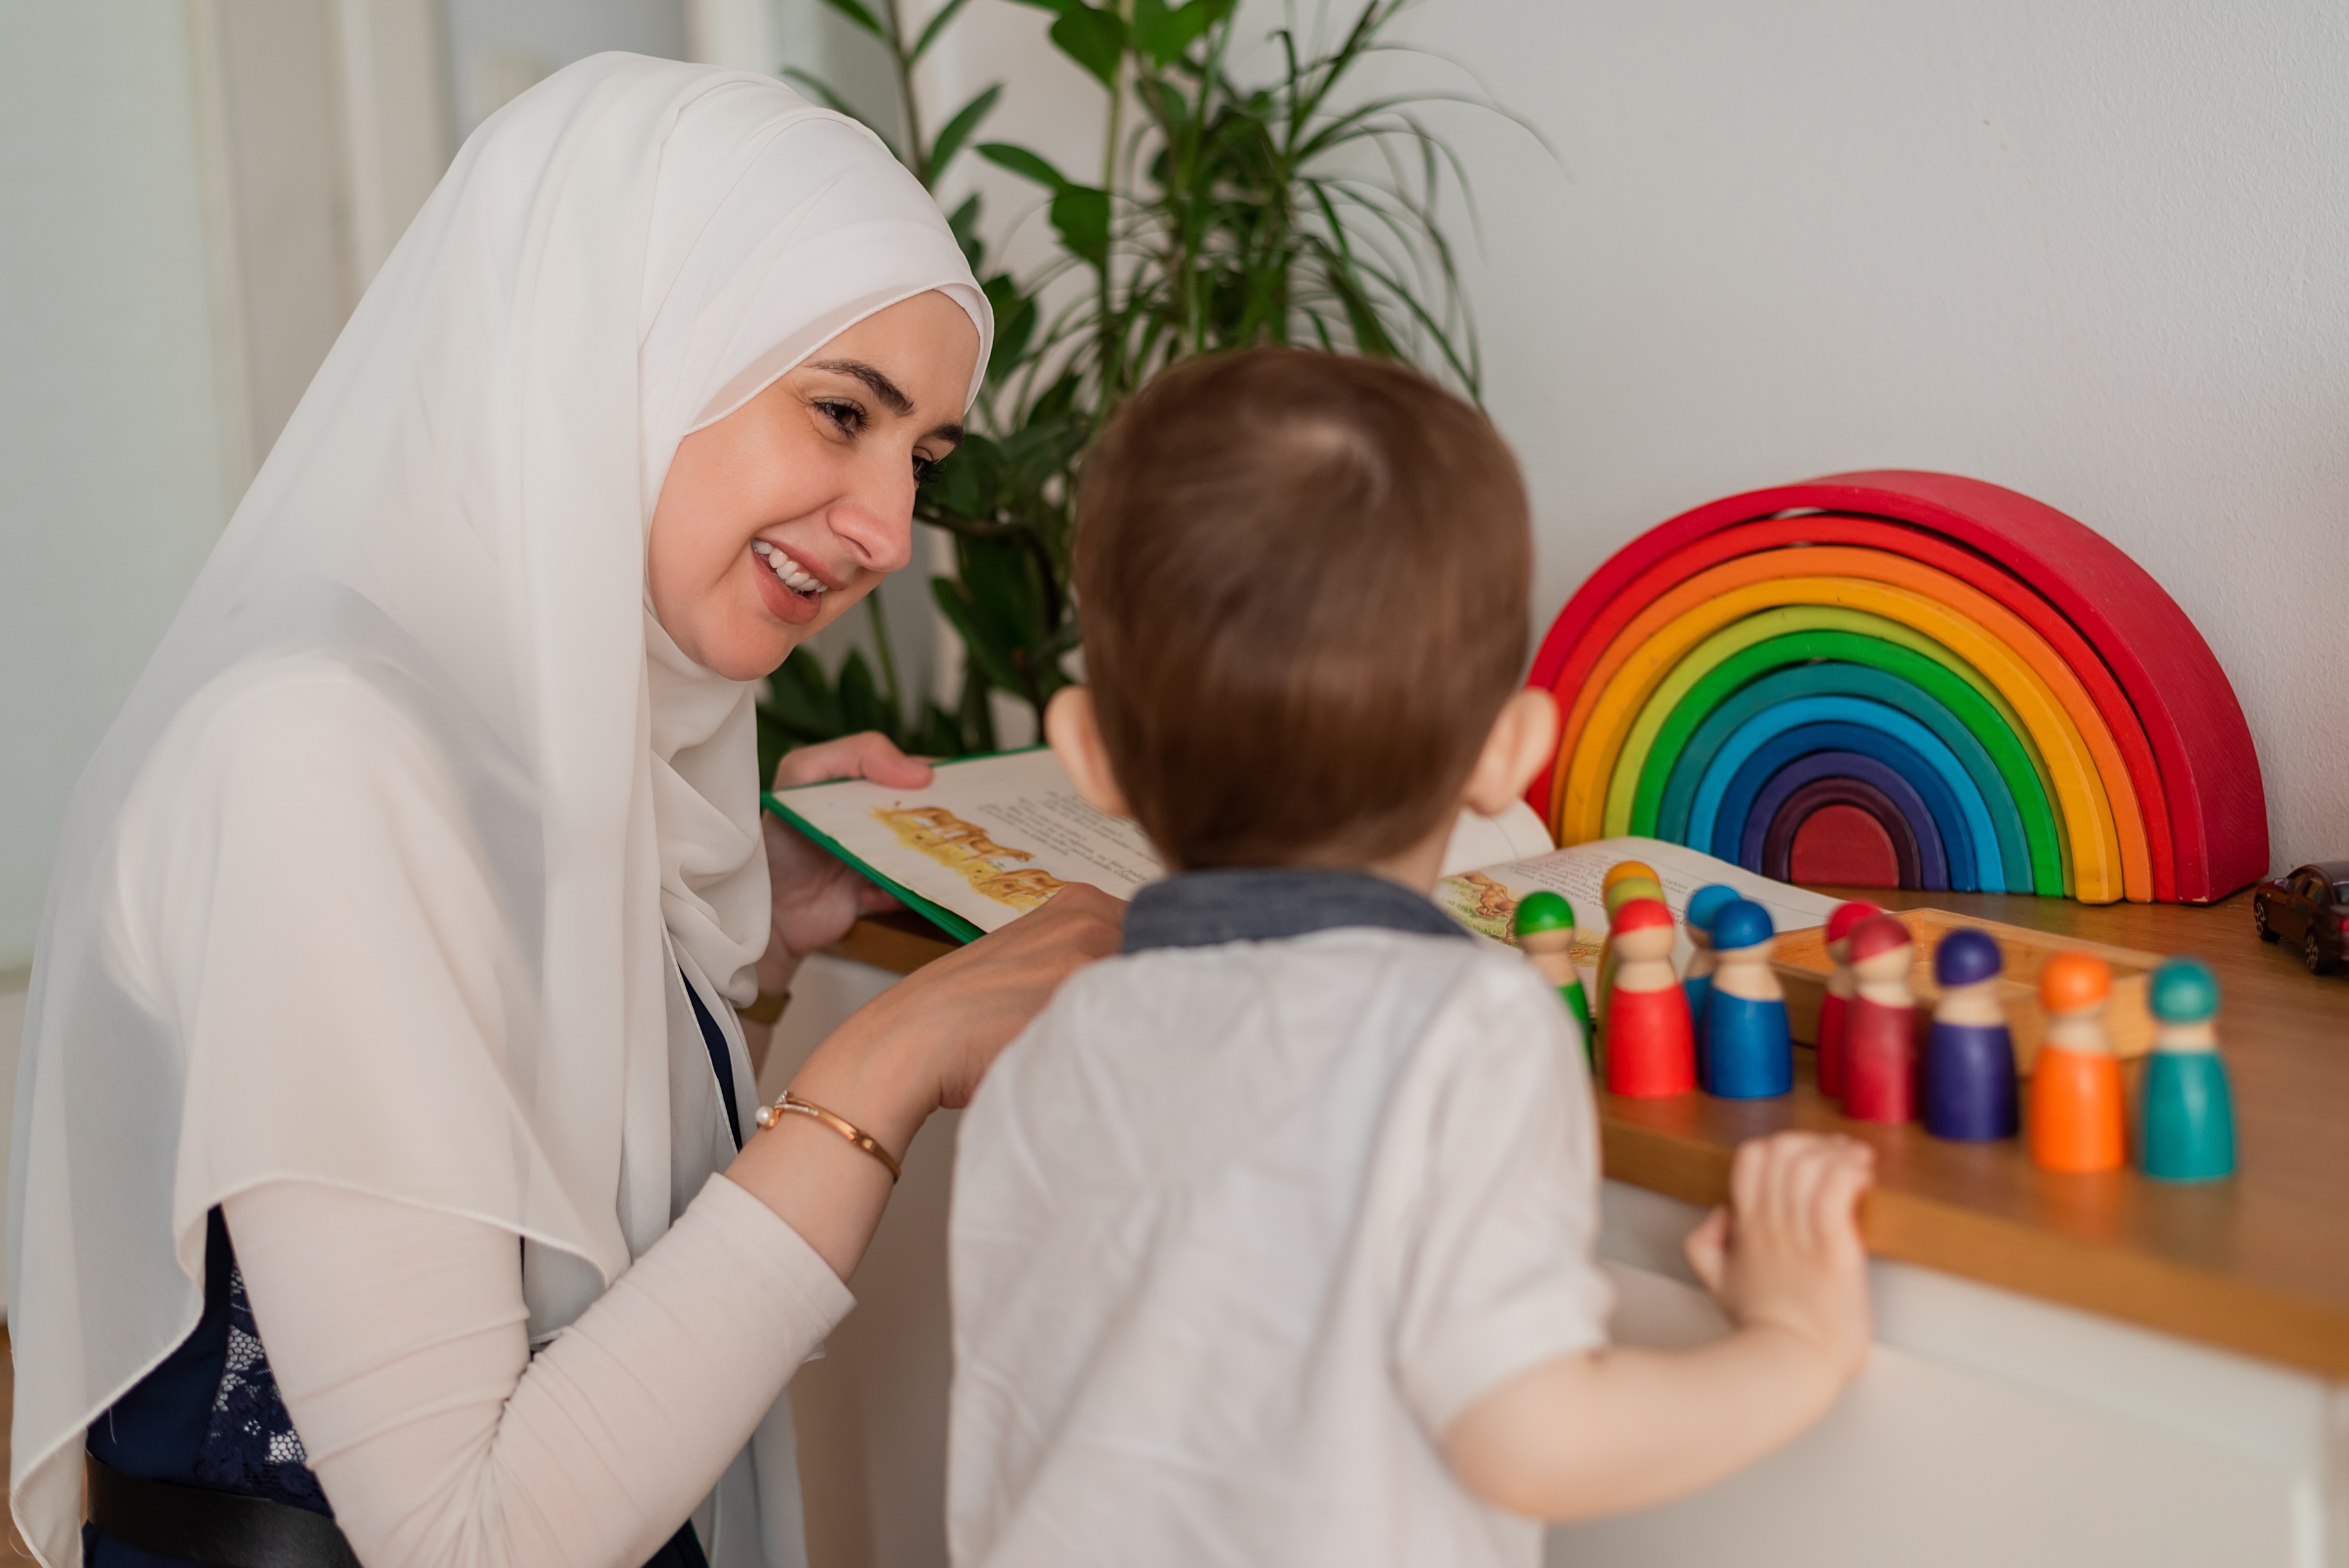 Teacher and preschool child playing together with colourful toys in the Montessori school classroom or kindergarten.